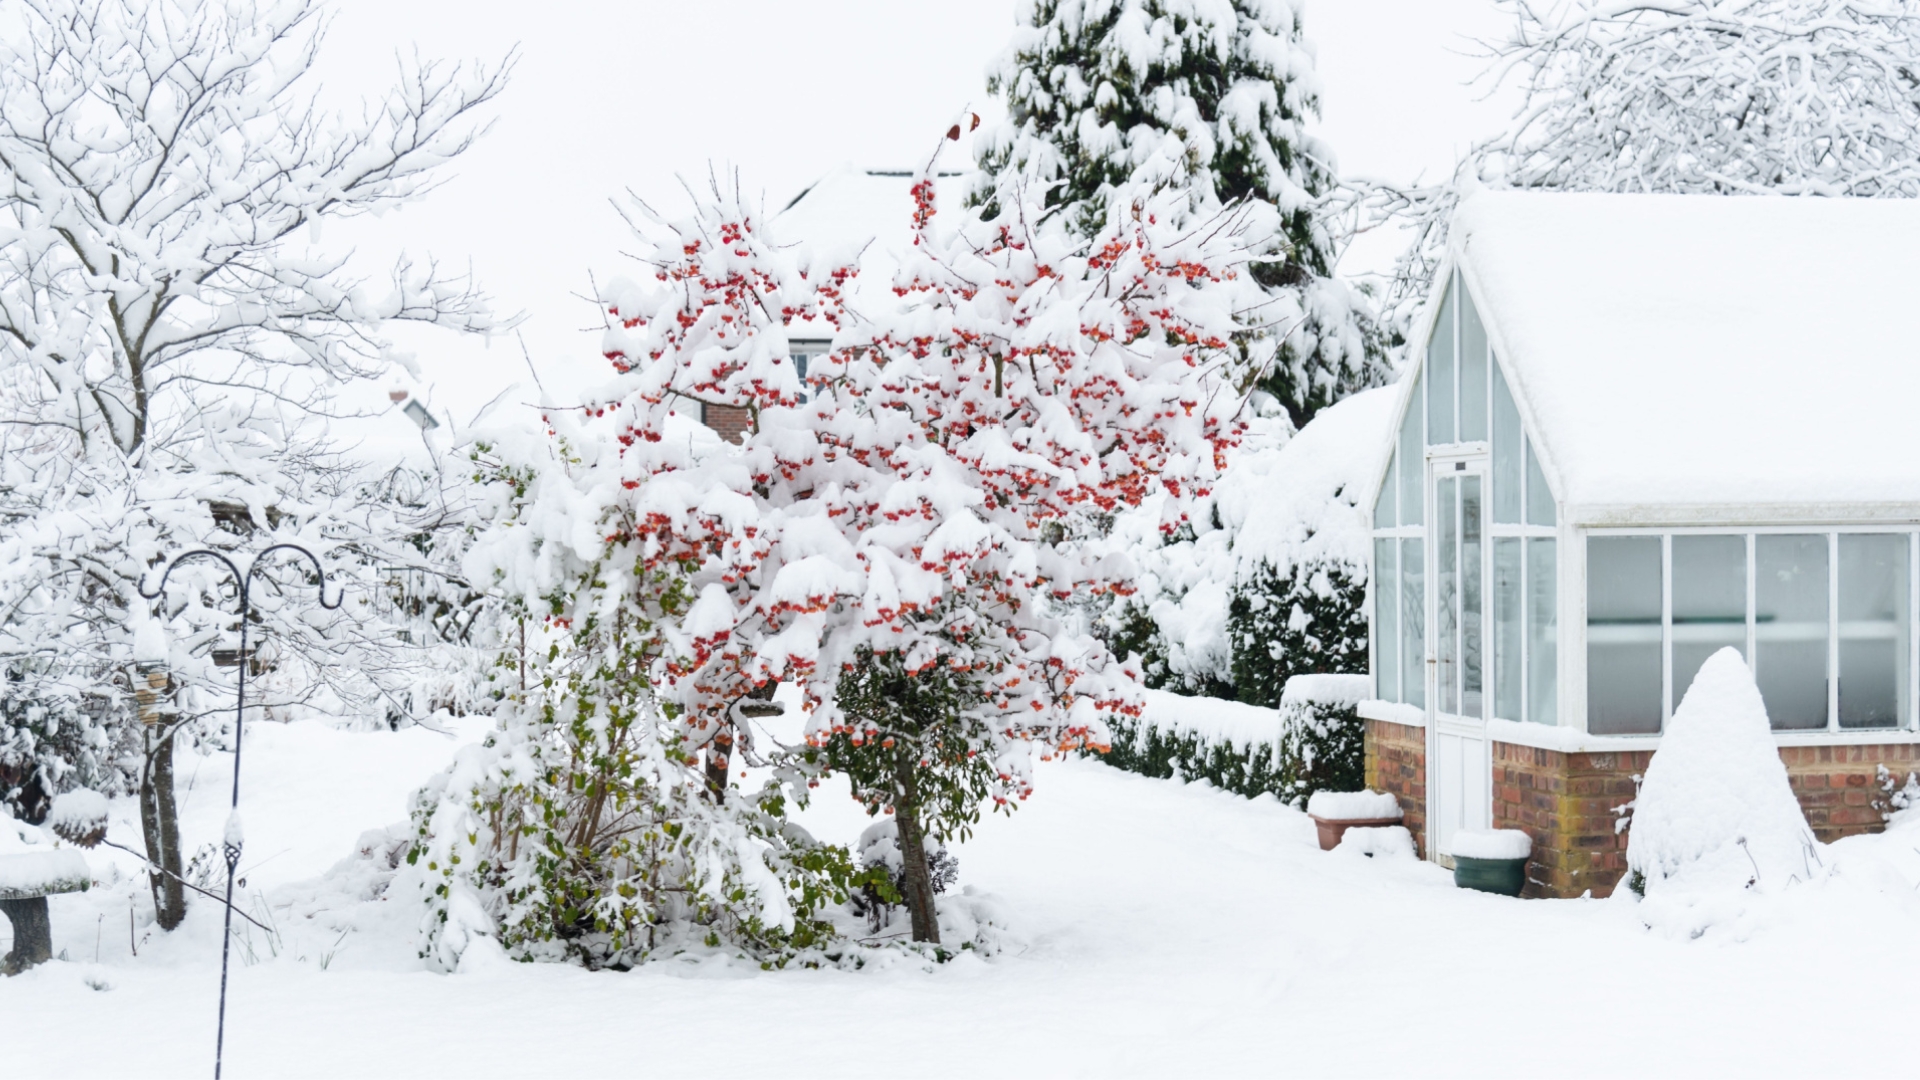 7 Garden Items You Should Never Keep Outside Over Winter